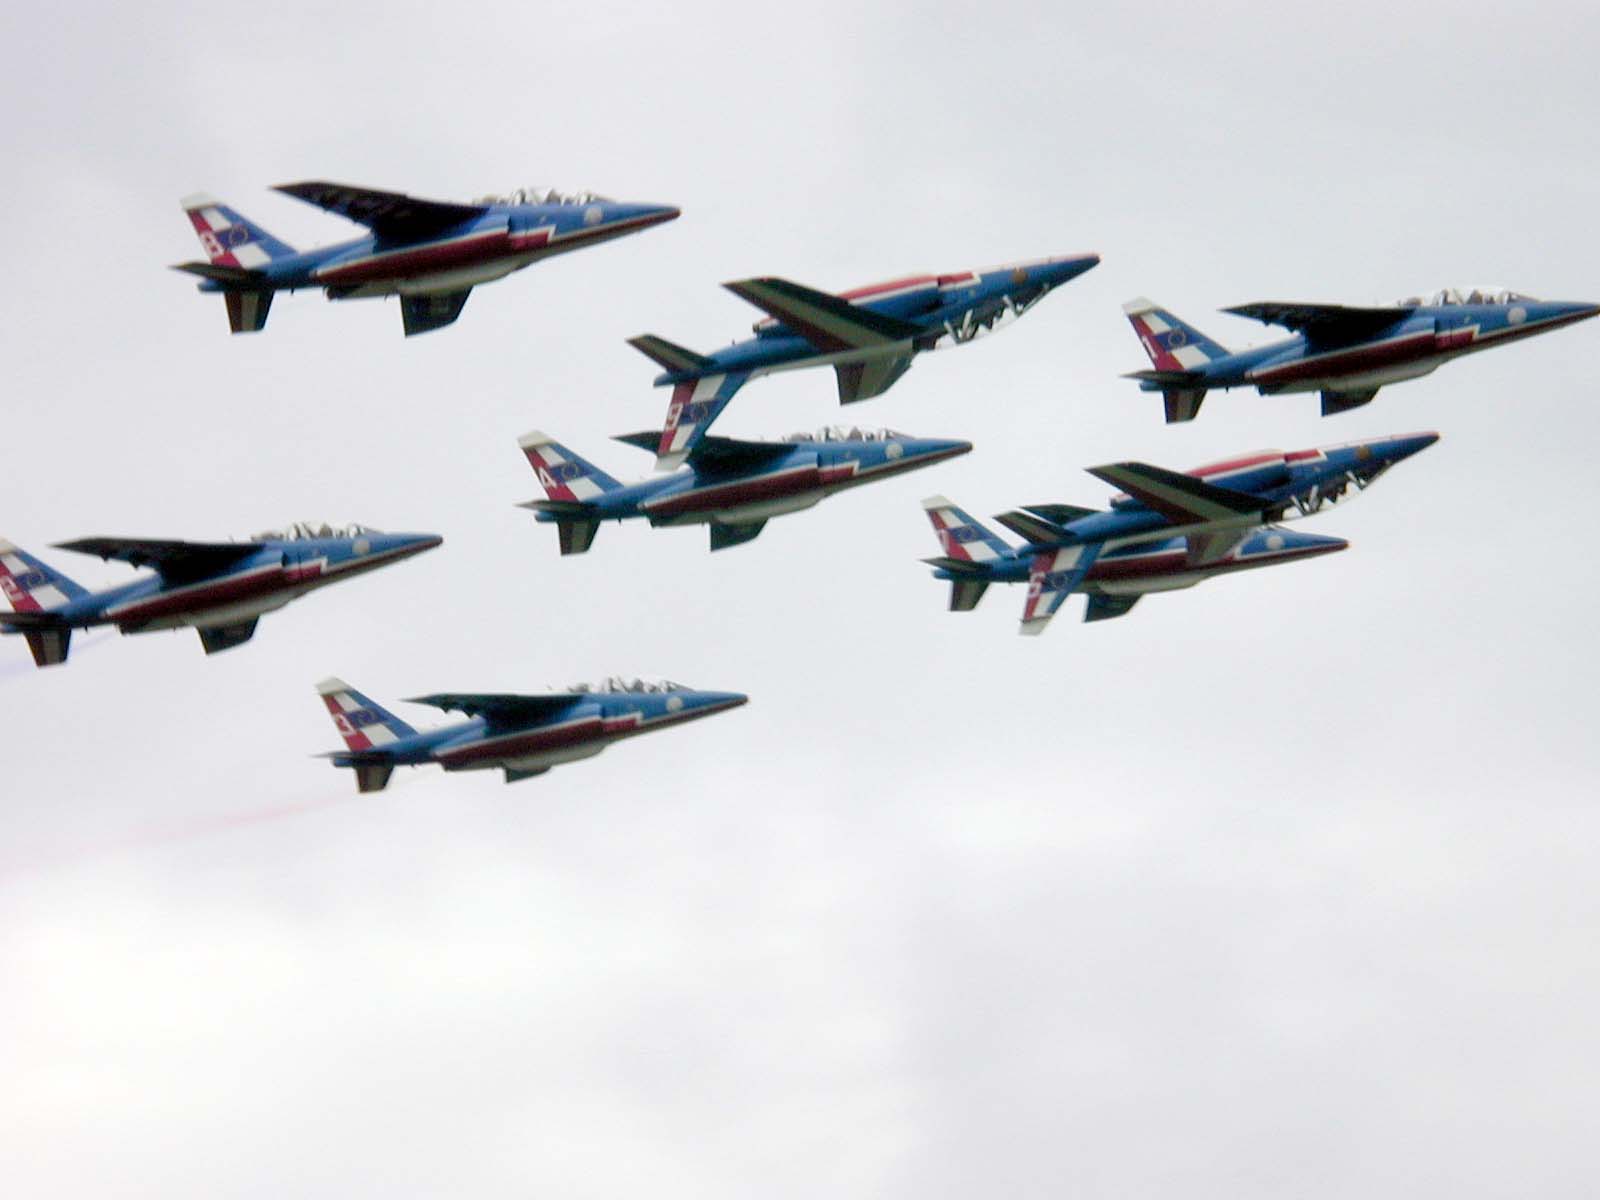 vehicles air squadron fighterplanes redarrows arrows airshow squad formation